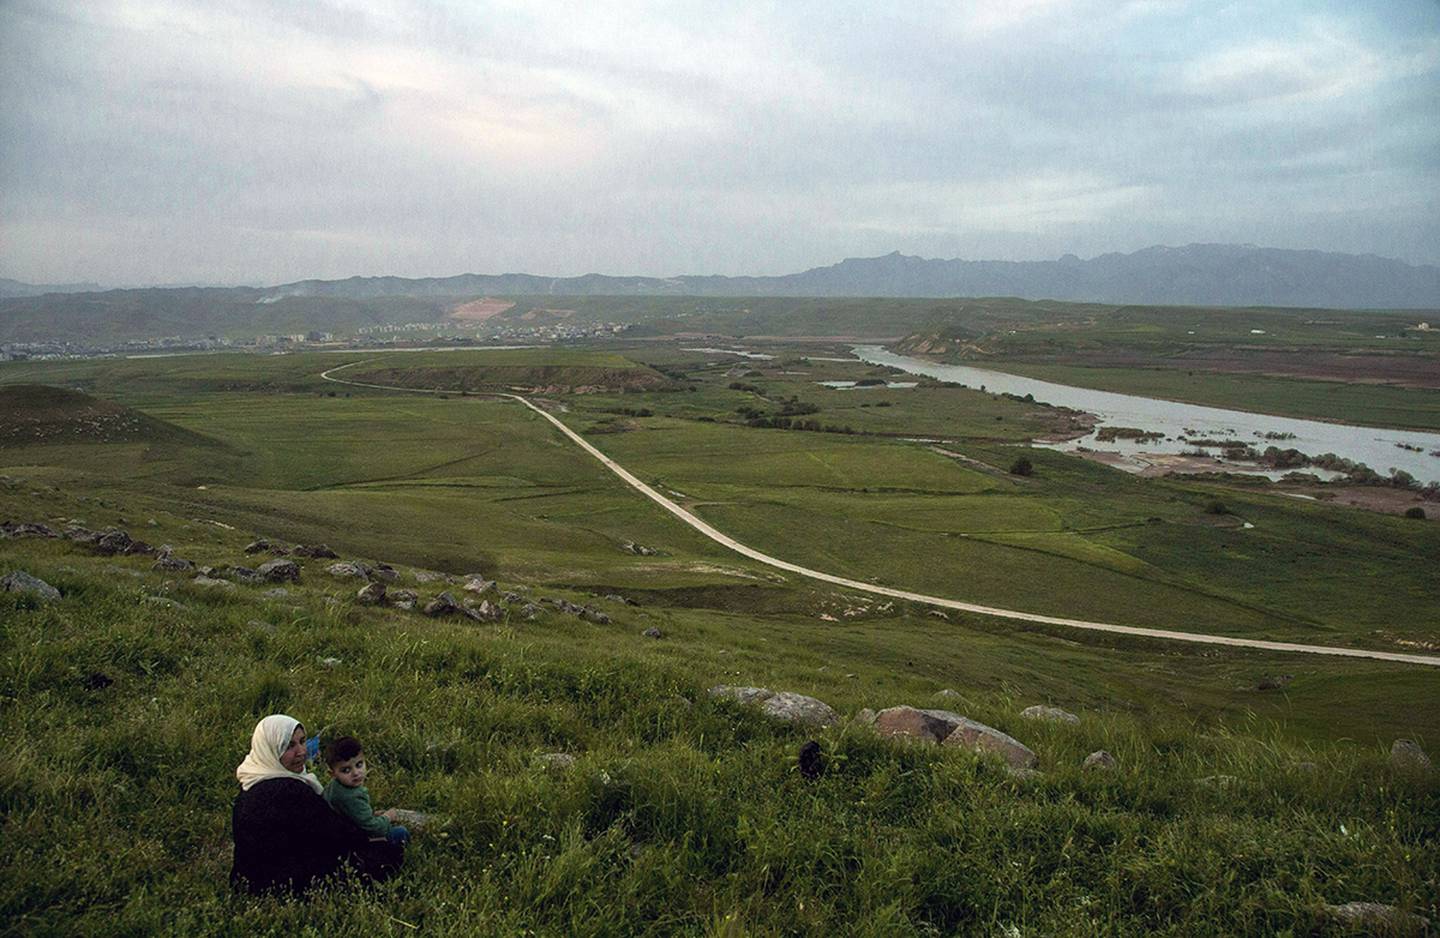 In this file photo dated May 1, 2019, a woman and child sit on a hill overlooking the Euphrates River as families picnic on May Day, in Derik, Syria.